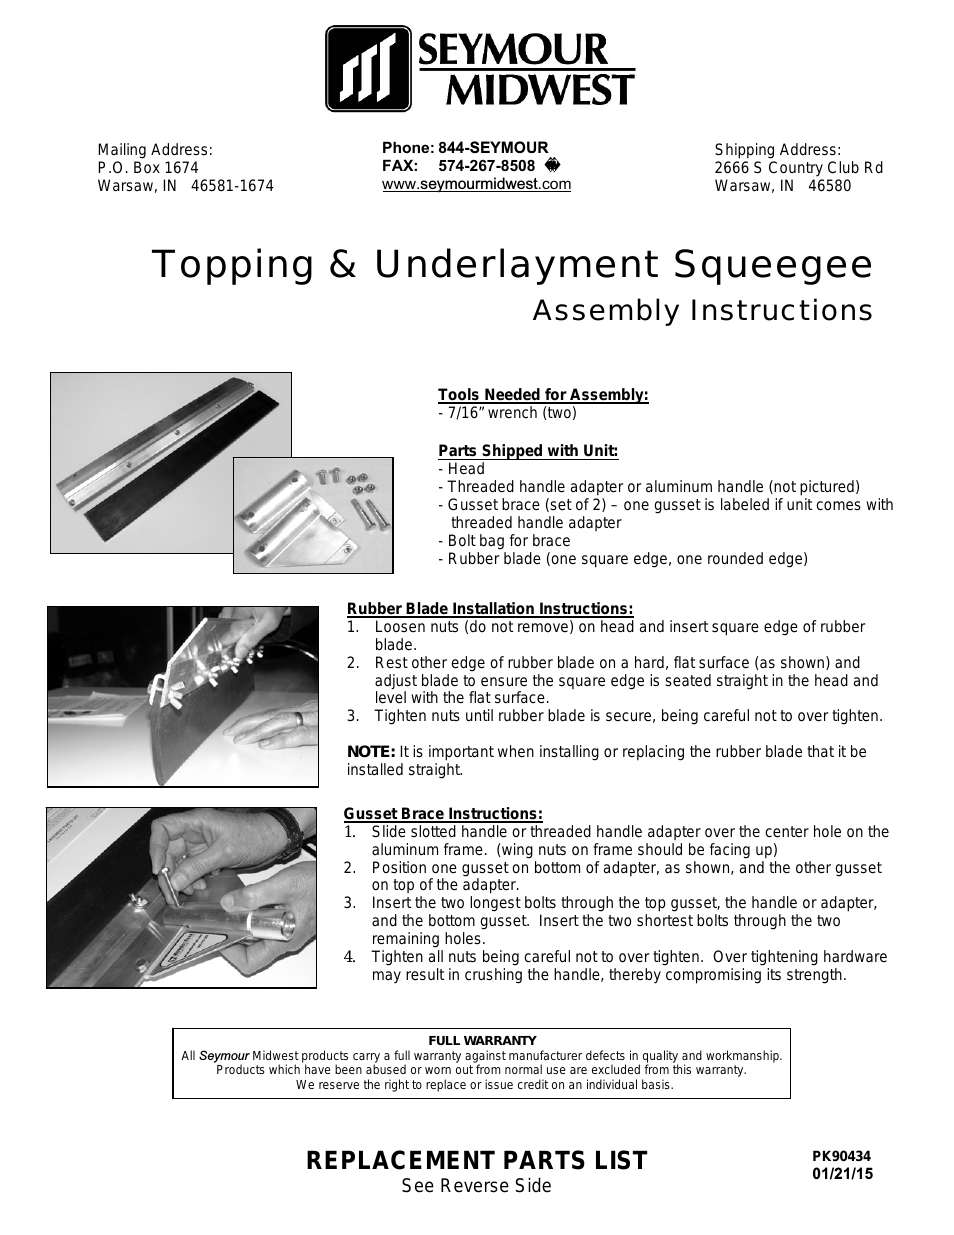 Topping & Underlayment Squeegee(PK90434)